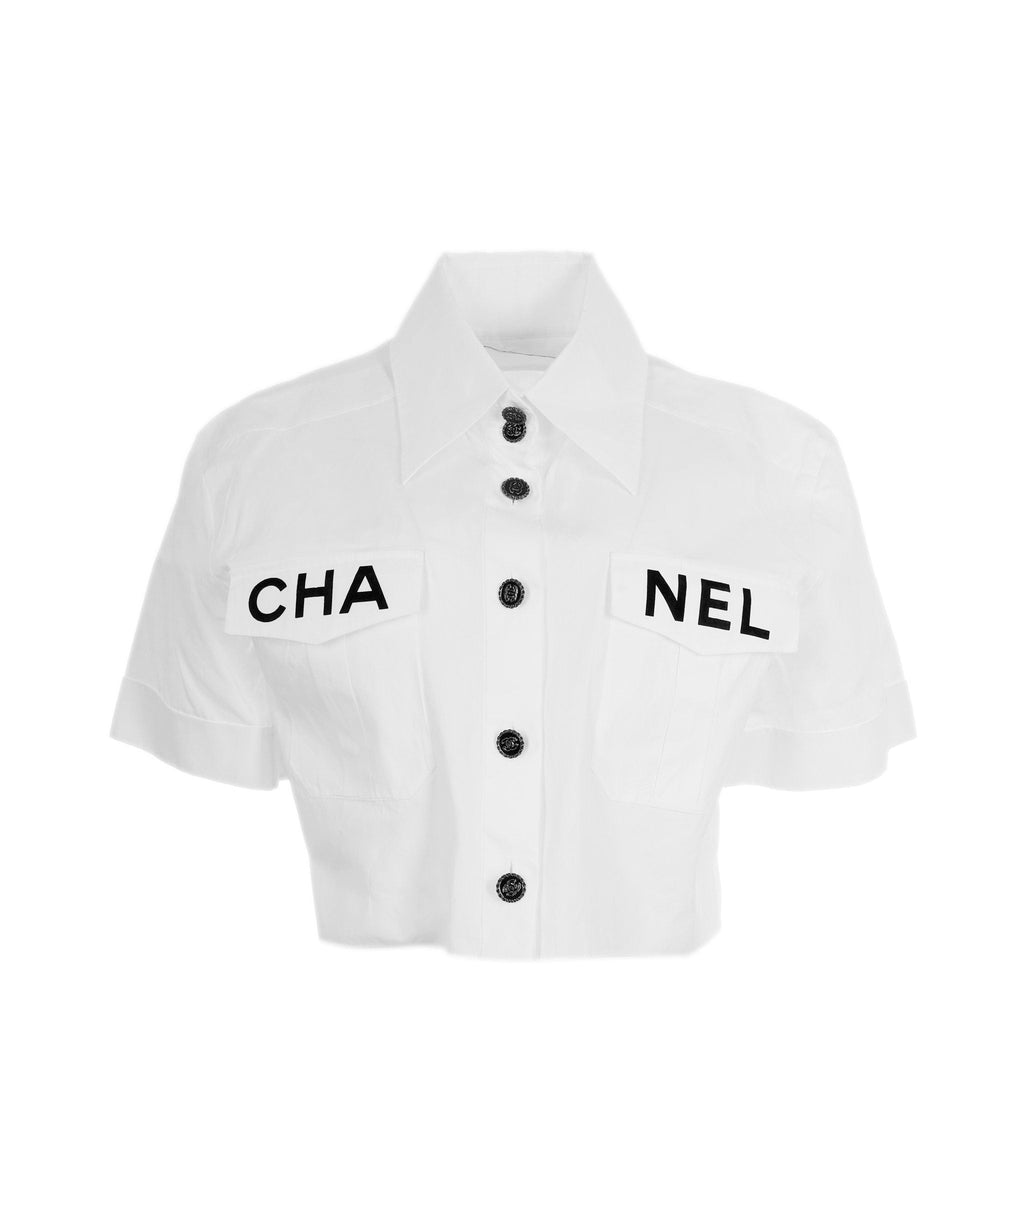 chanel cropped shirt 2019 CHA NEL ASL8440 – LuxuryPromise